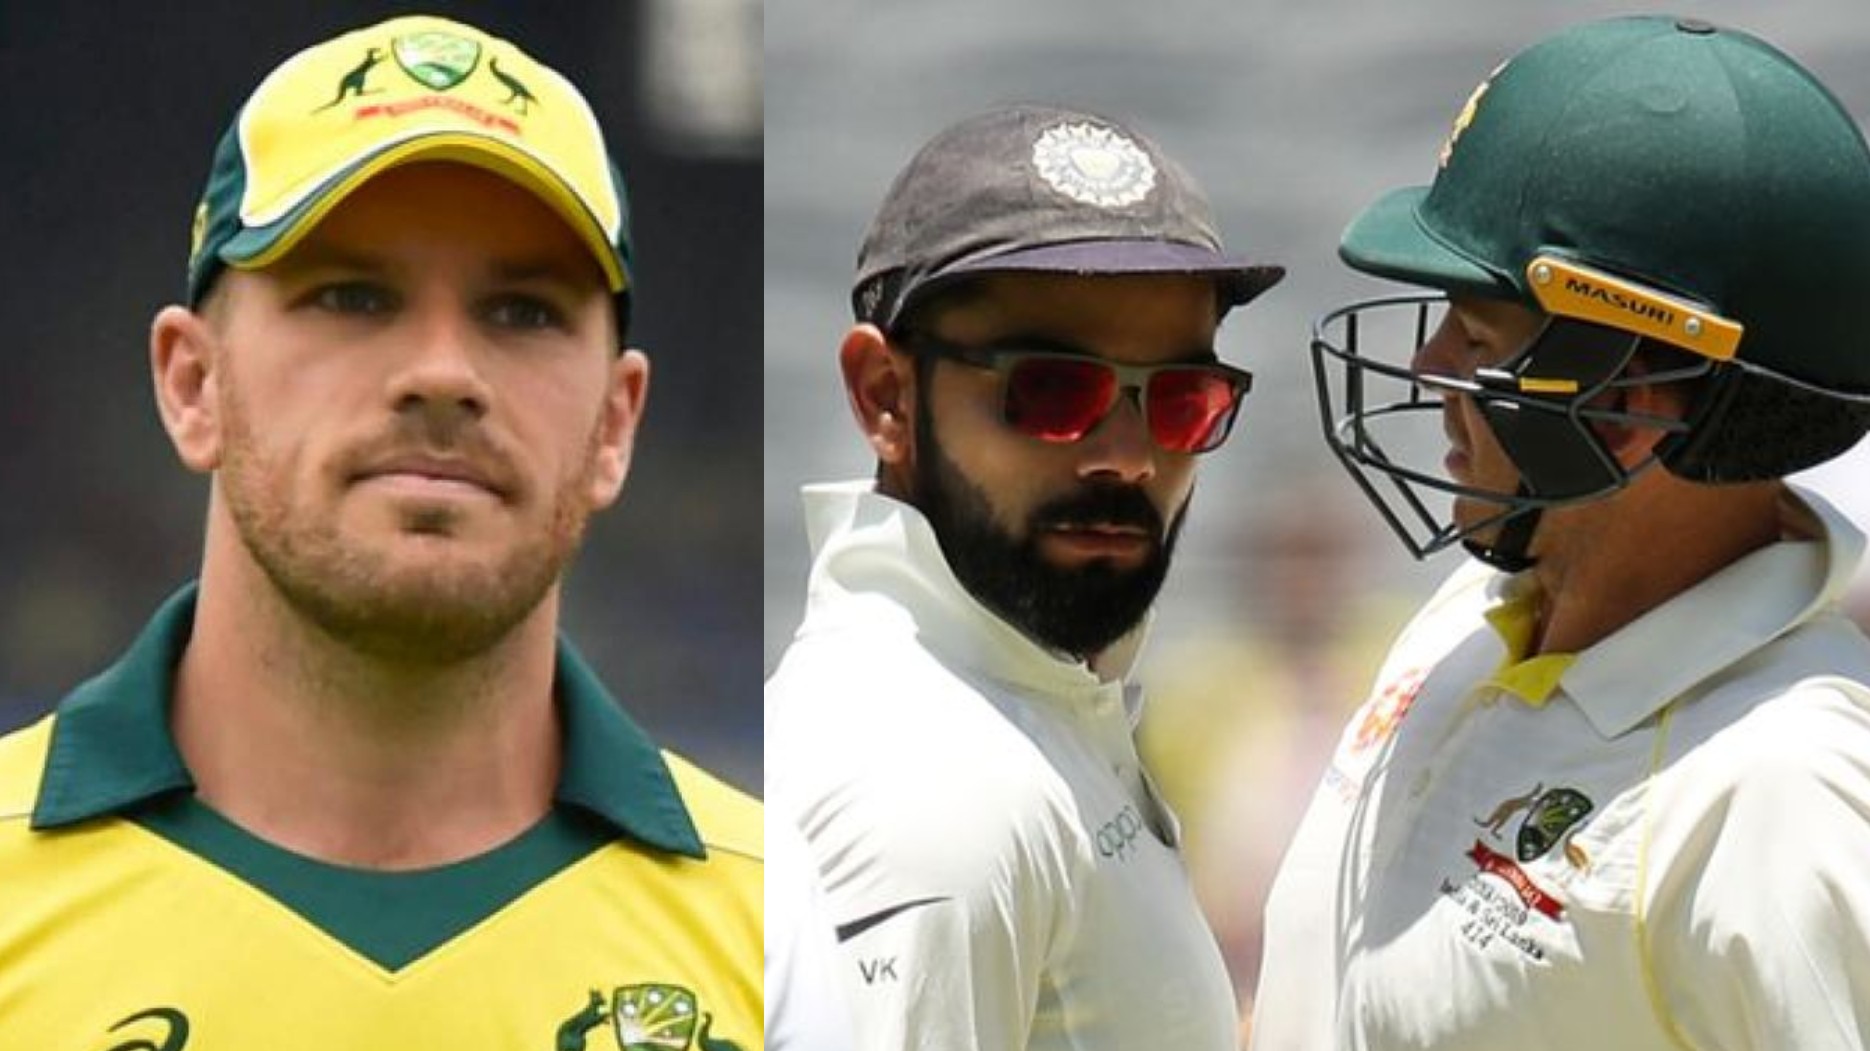 AUS v IND 2020-21: “Don’t want Kohli to get ruthless on us,” Finch advises Australia to adopt balanced aggression